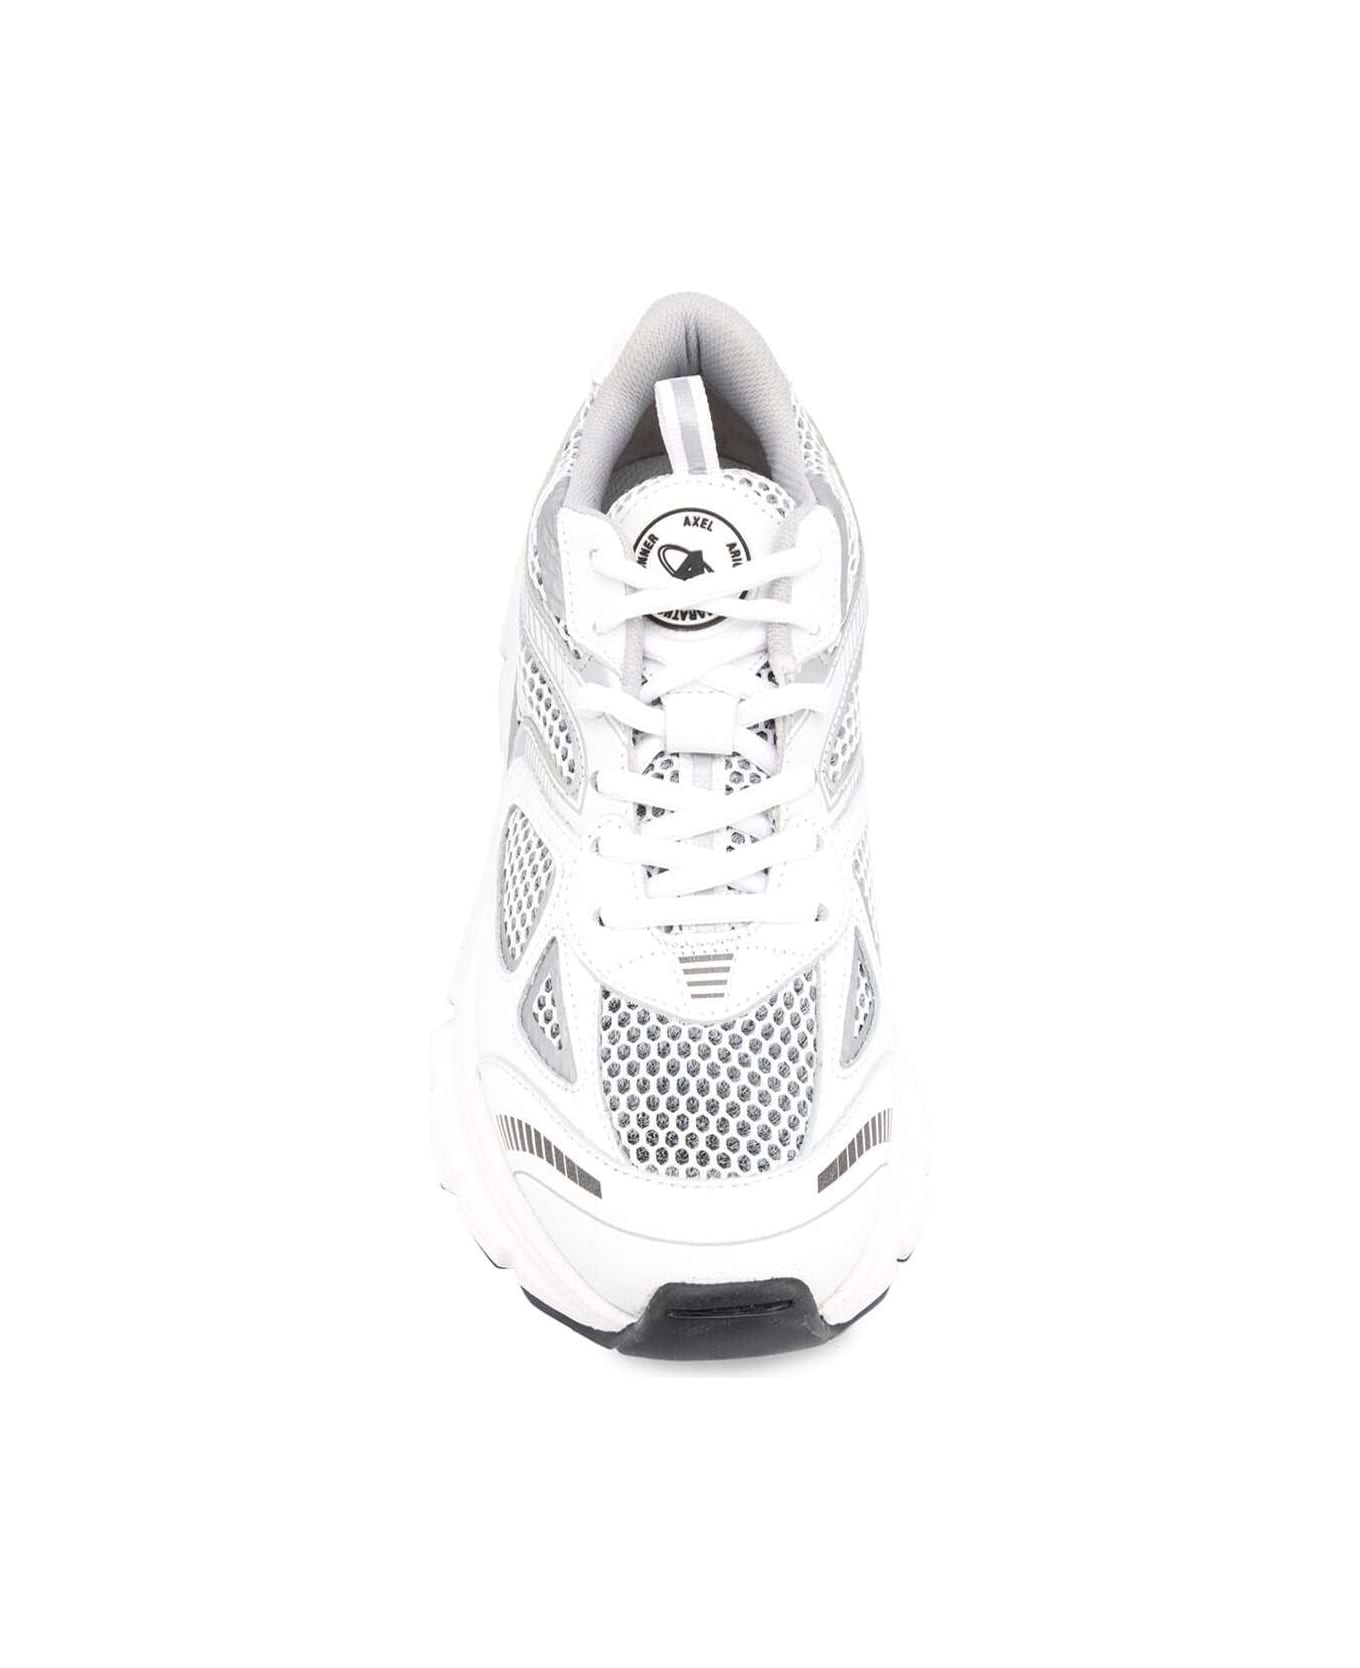 Axel Arigato Marathon Runner Recycled Rubber And Leather Sneakers Axel Arigato Woman - White スニーカー